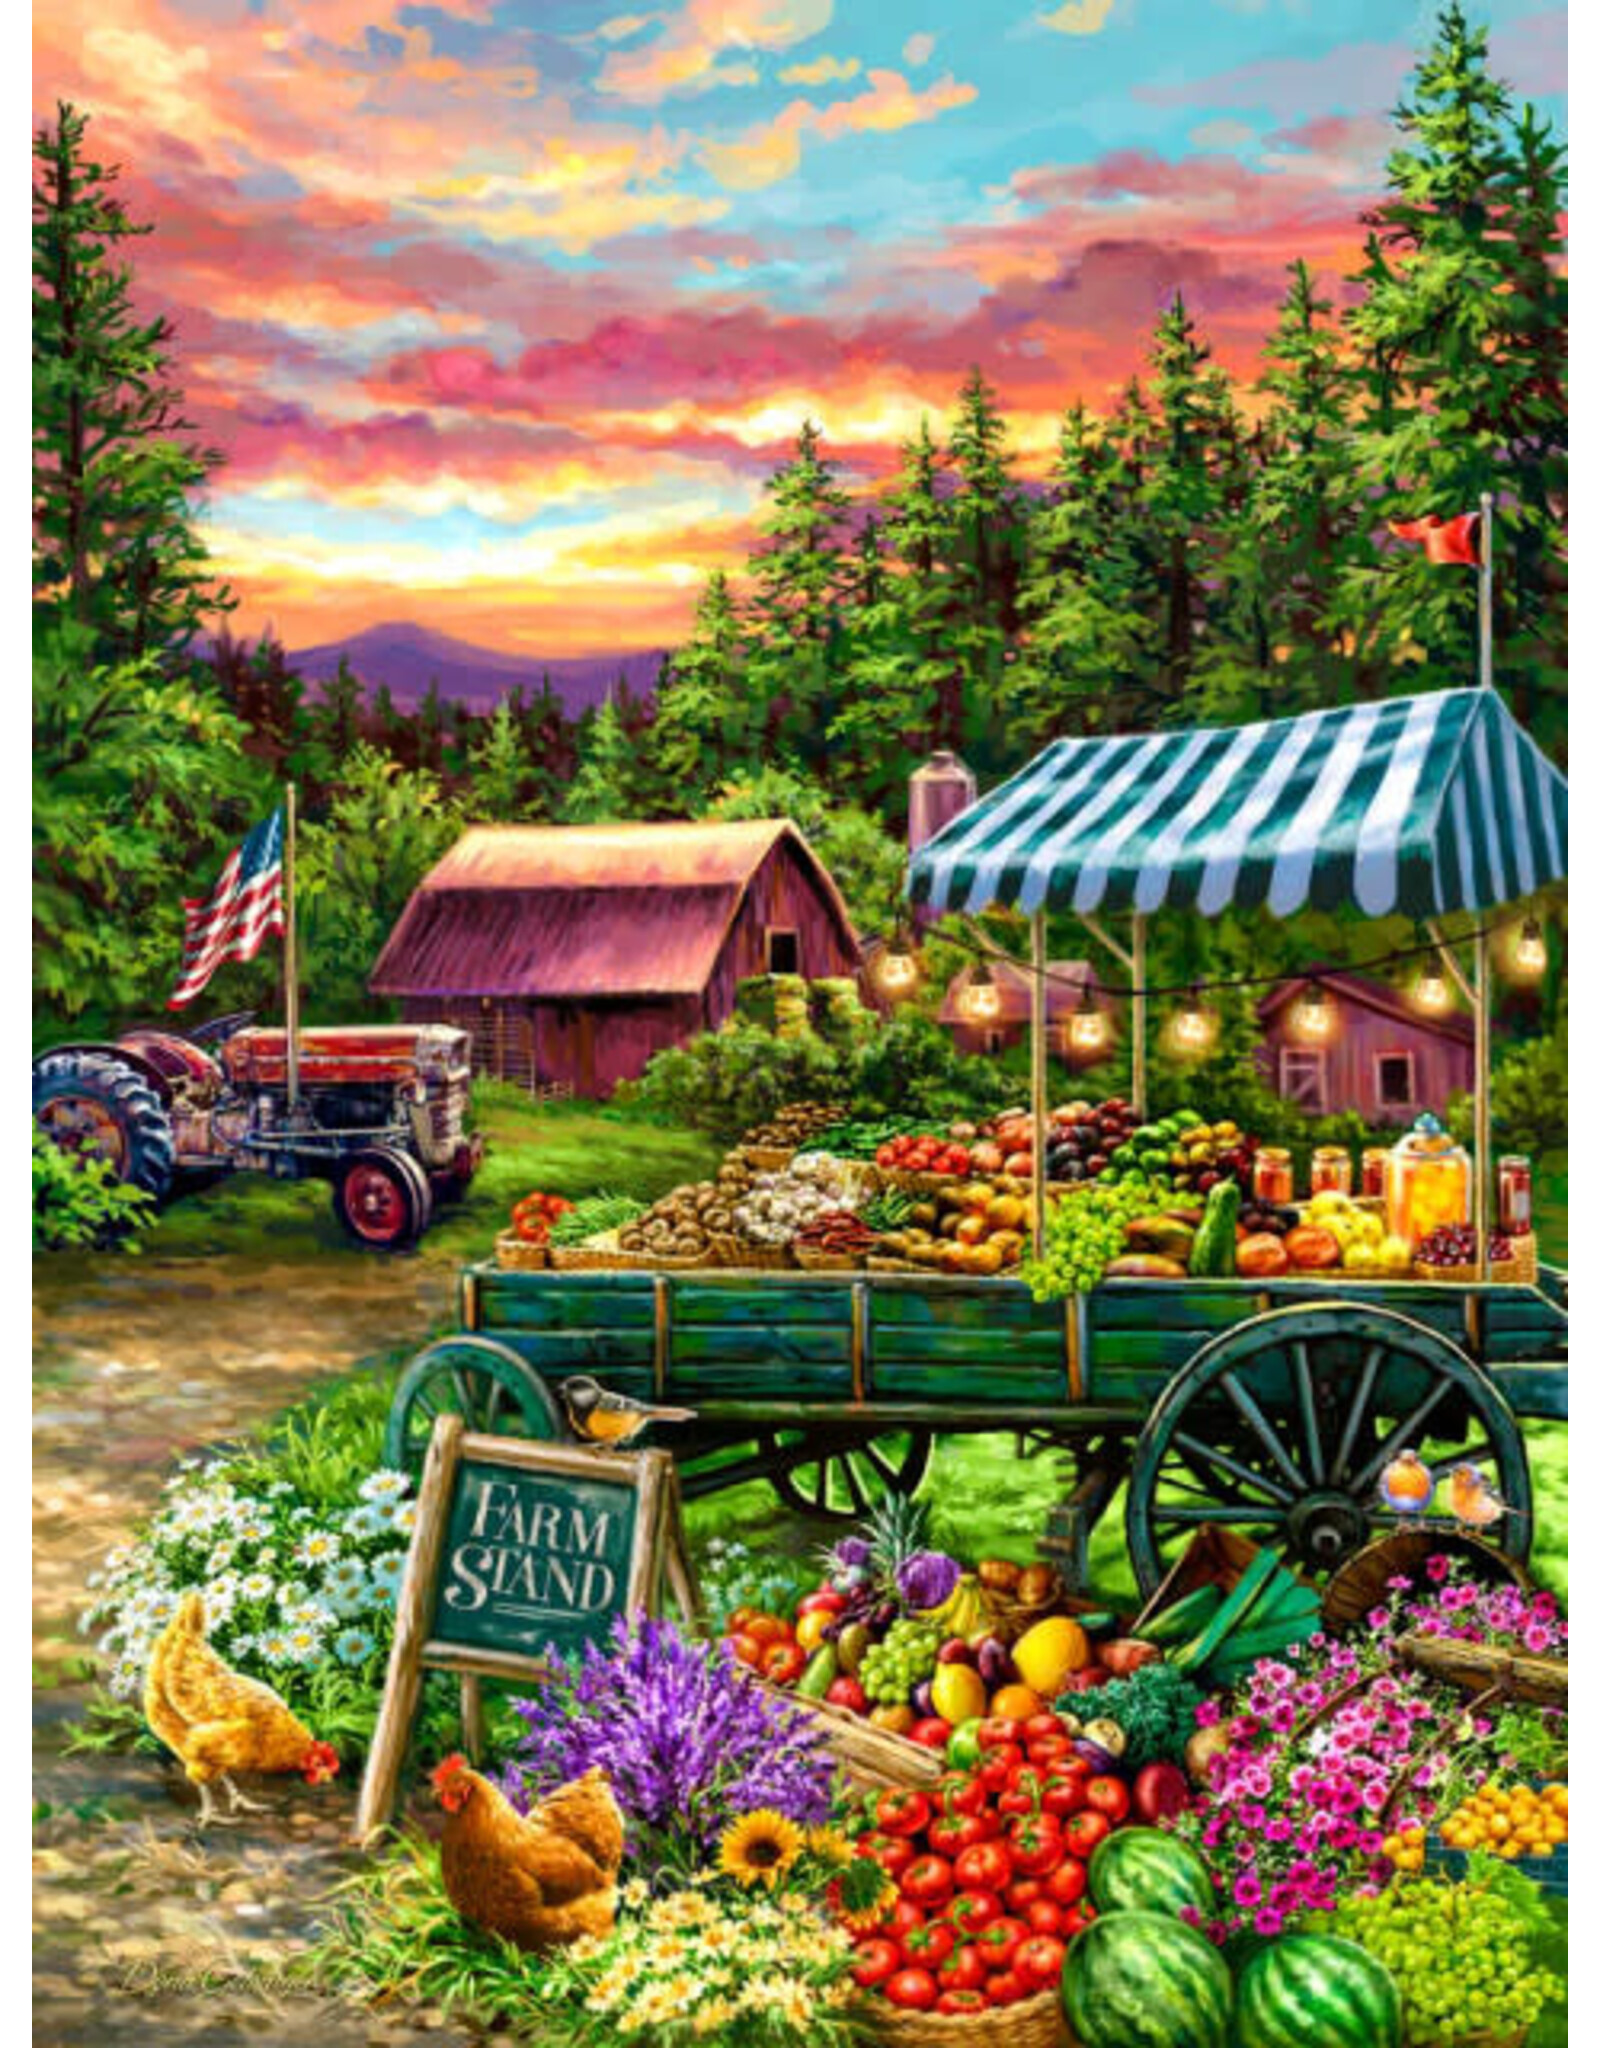 The Fruit Stand 60 Piece Jigsaw Puzzle